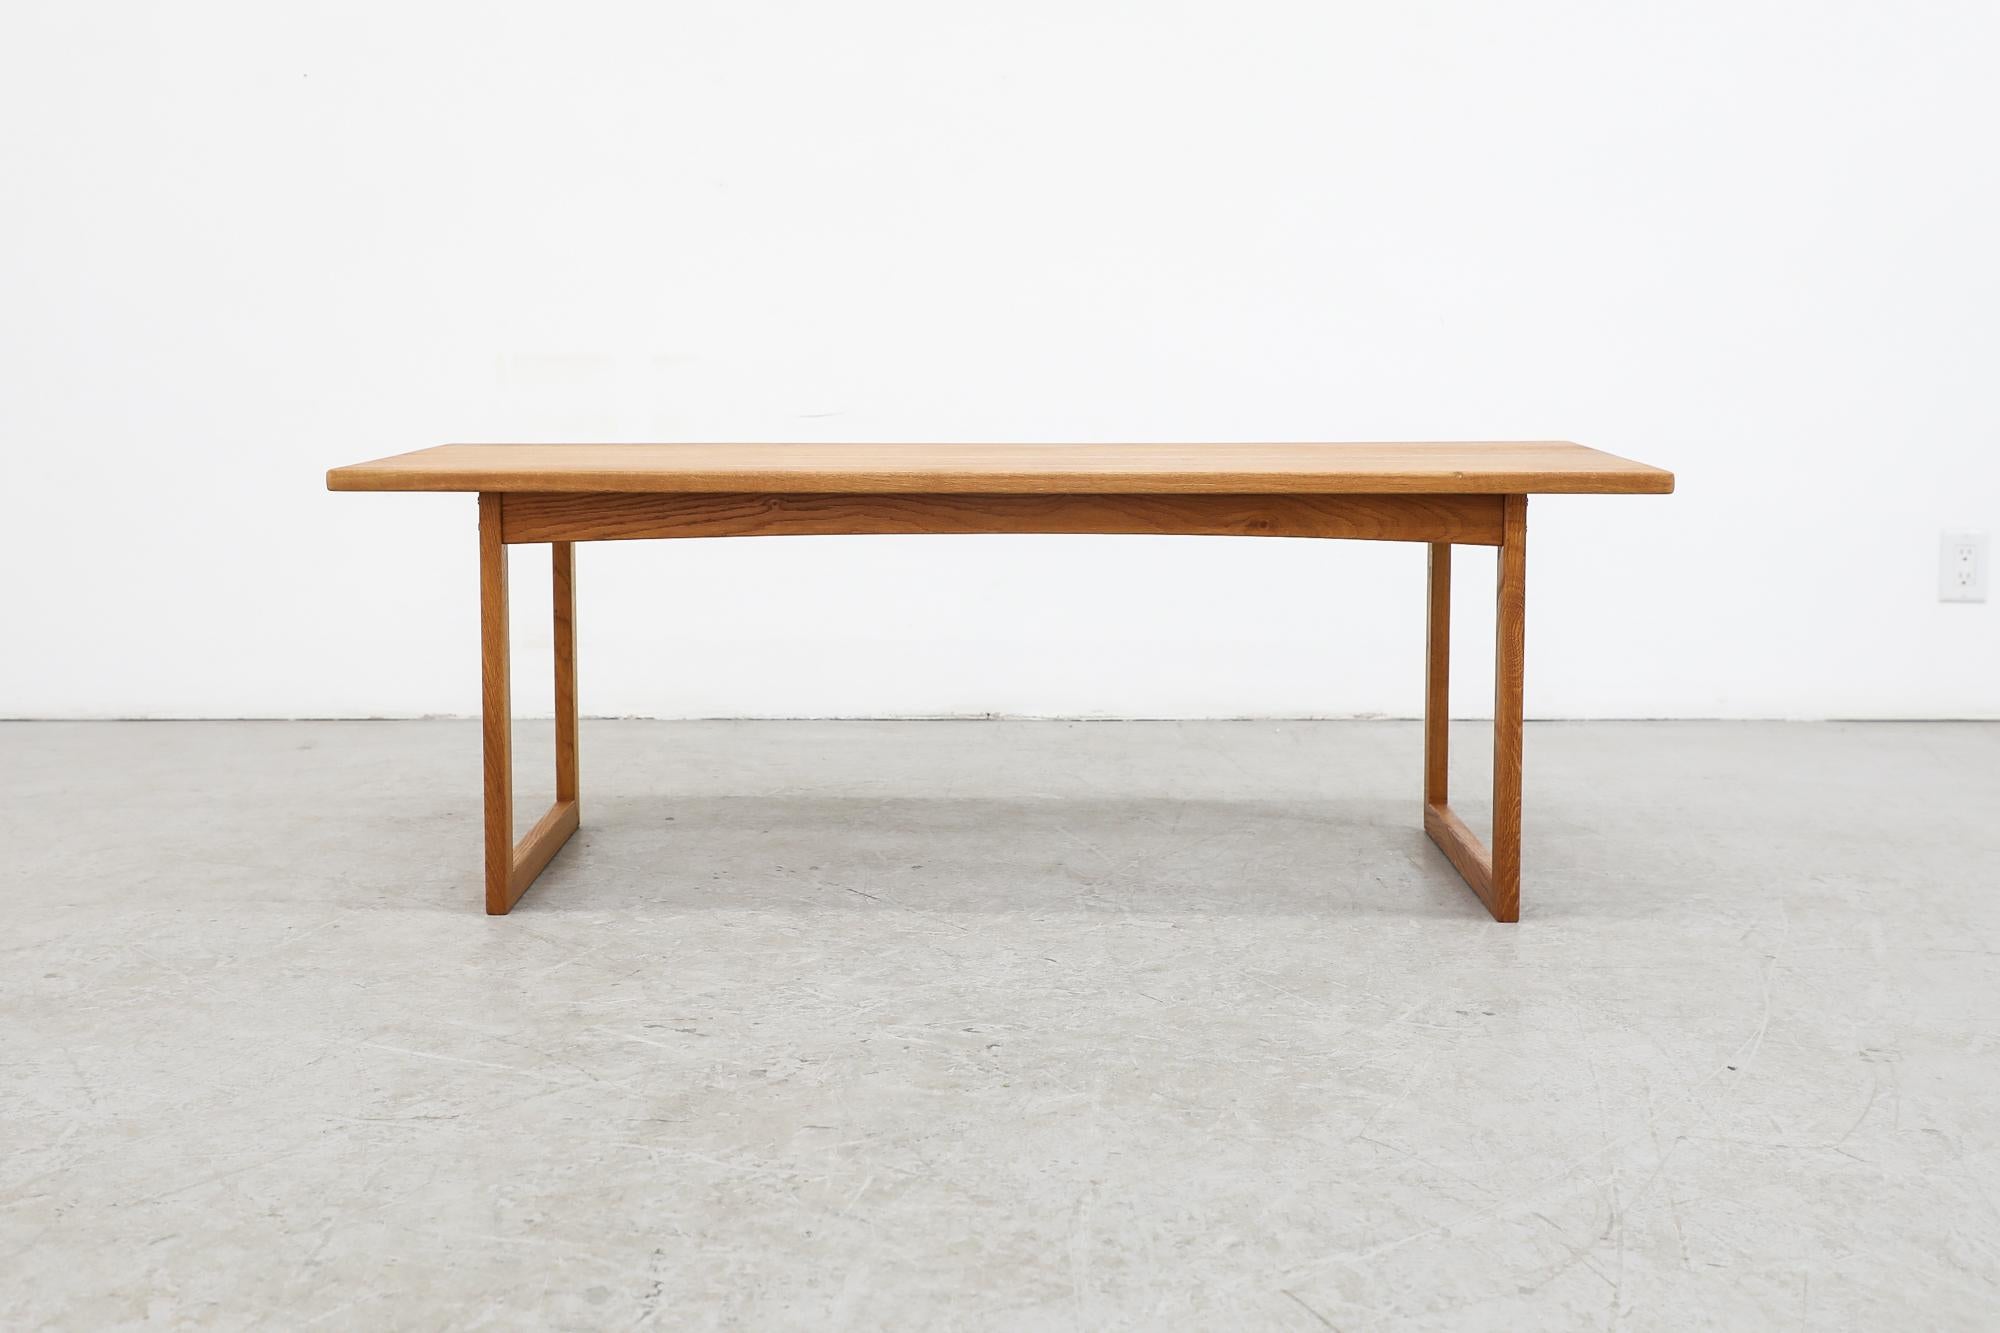 Mid-century Kurt Østervig style oak coffee table with simple box square frame and u-shaped legs. In original condition with some fading to the table top, consistent with its age and use.